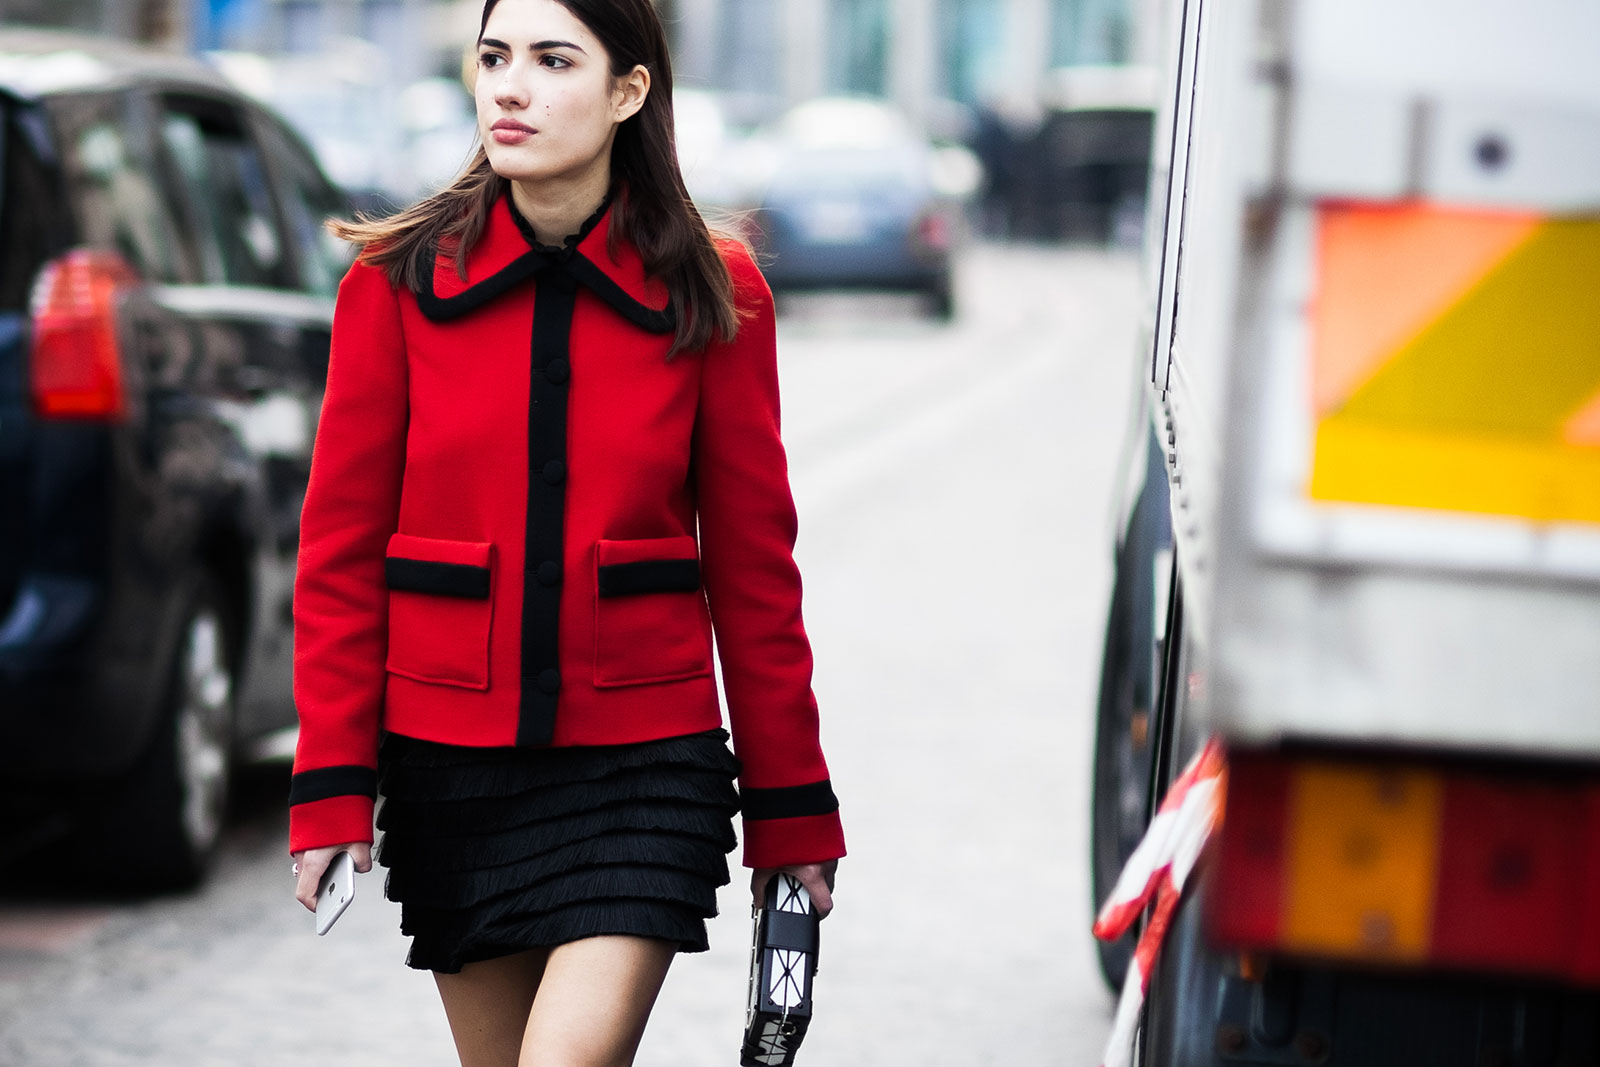 Patricia Manfield wearing a Philosophy jacket, Pollini boots and Louis Vuitton clutch bag after the Philosophy Fall/Winter 2015-2016 fashion show in Milan, Italy